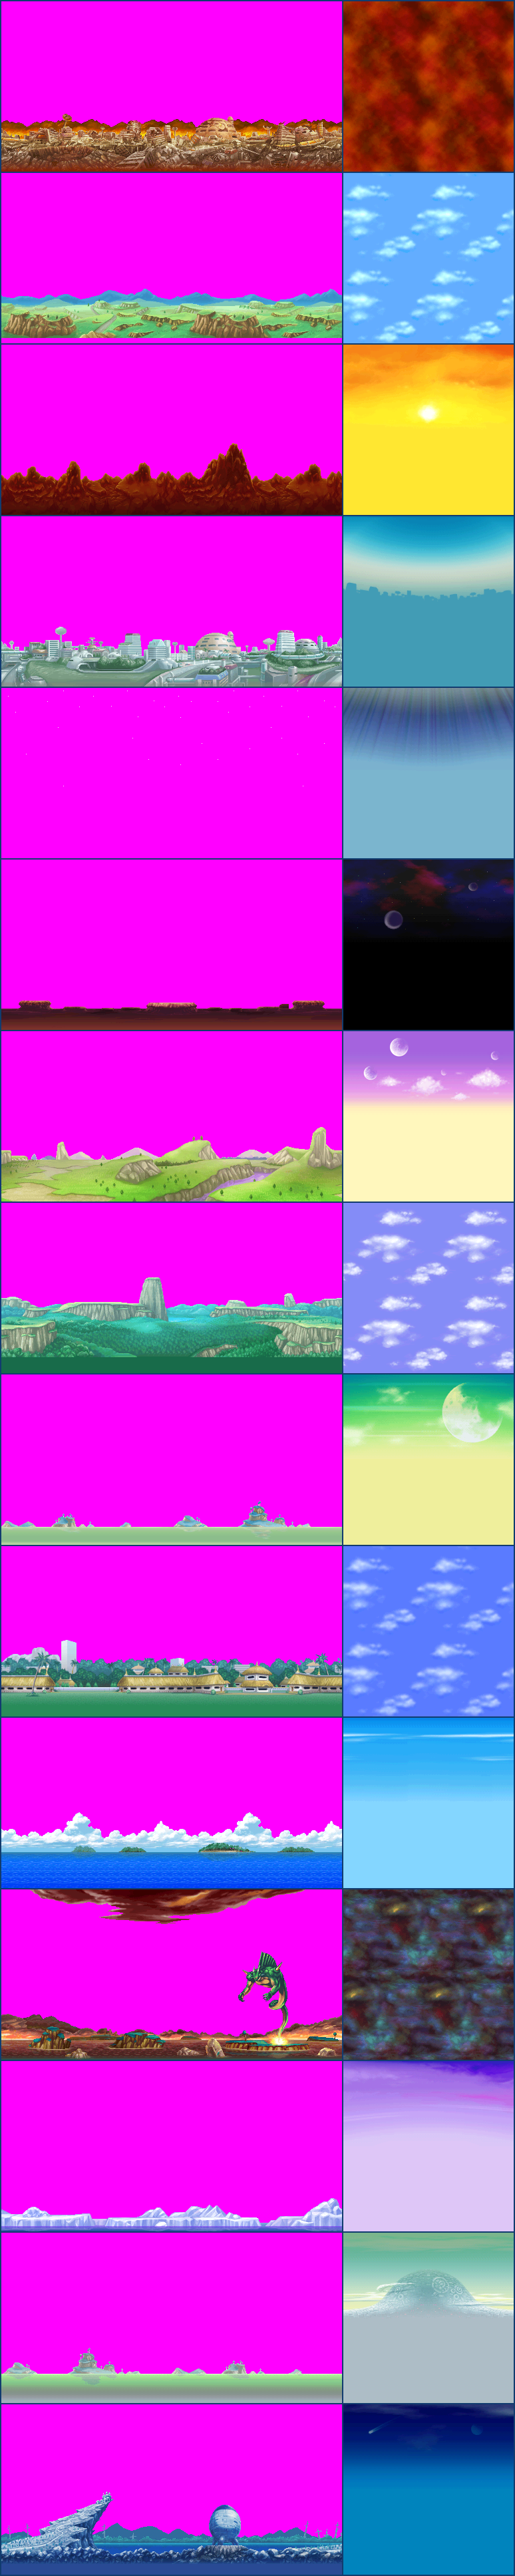 Dragon Ball Z: Supersonic Warriors 2 - Stage Backgrounds